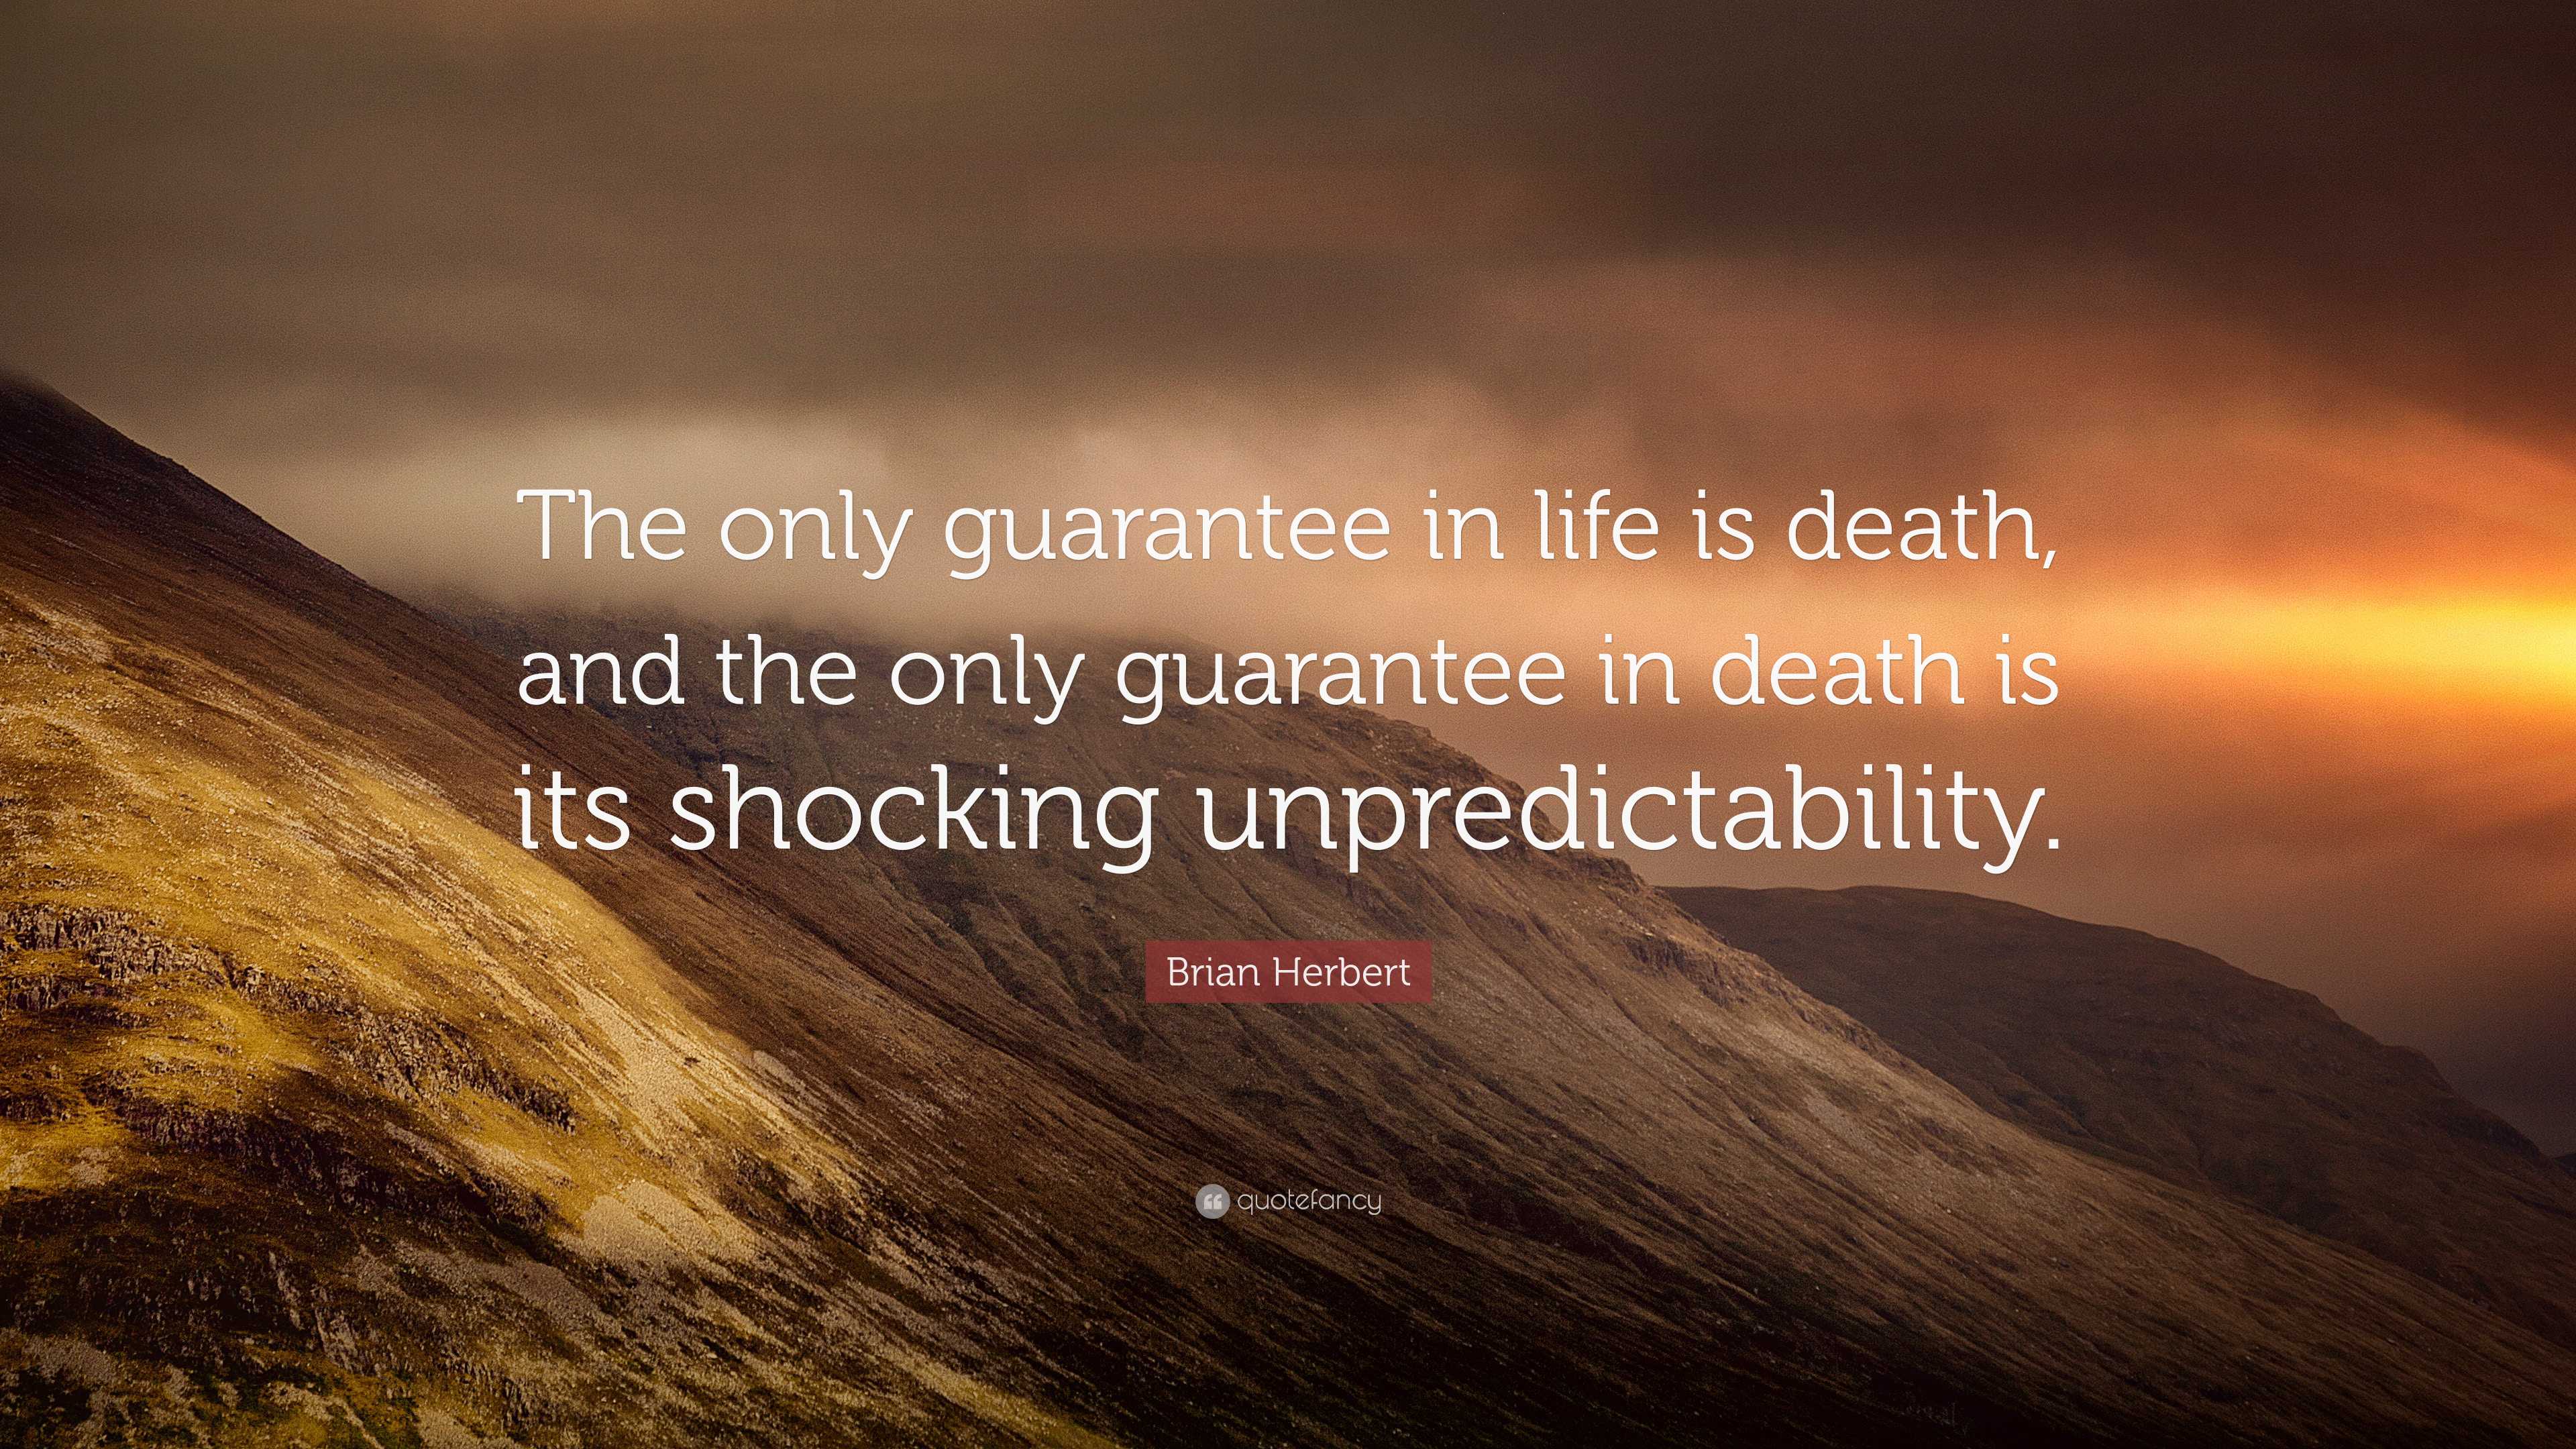 Brian Herbert Quote: “The only guarantee in life is death, and the only ...